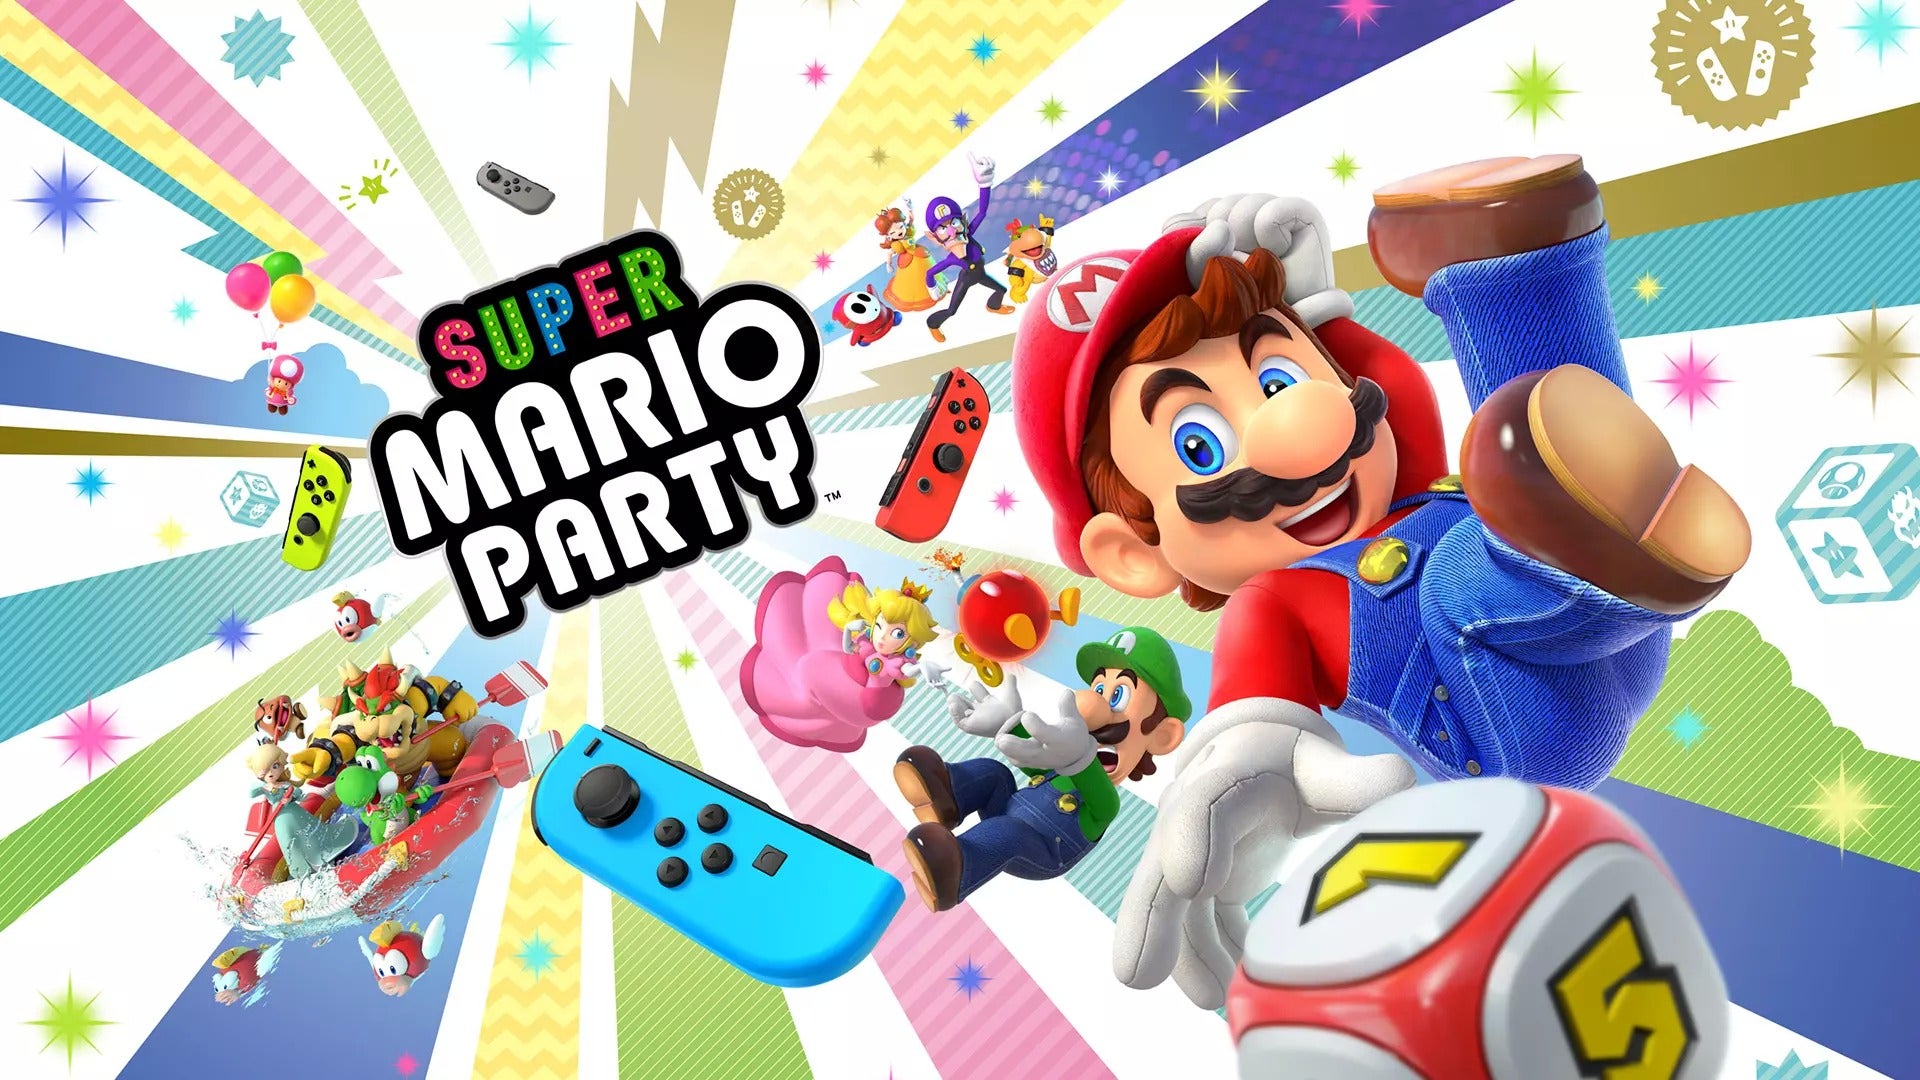 Image for Super Mario Party, Pokemon: Let’s Go, Pikachu and Eevee, and Super Smash Bros. Ultimate playable at EGX 2018